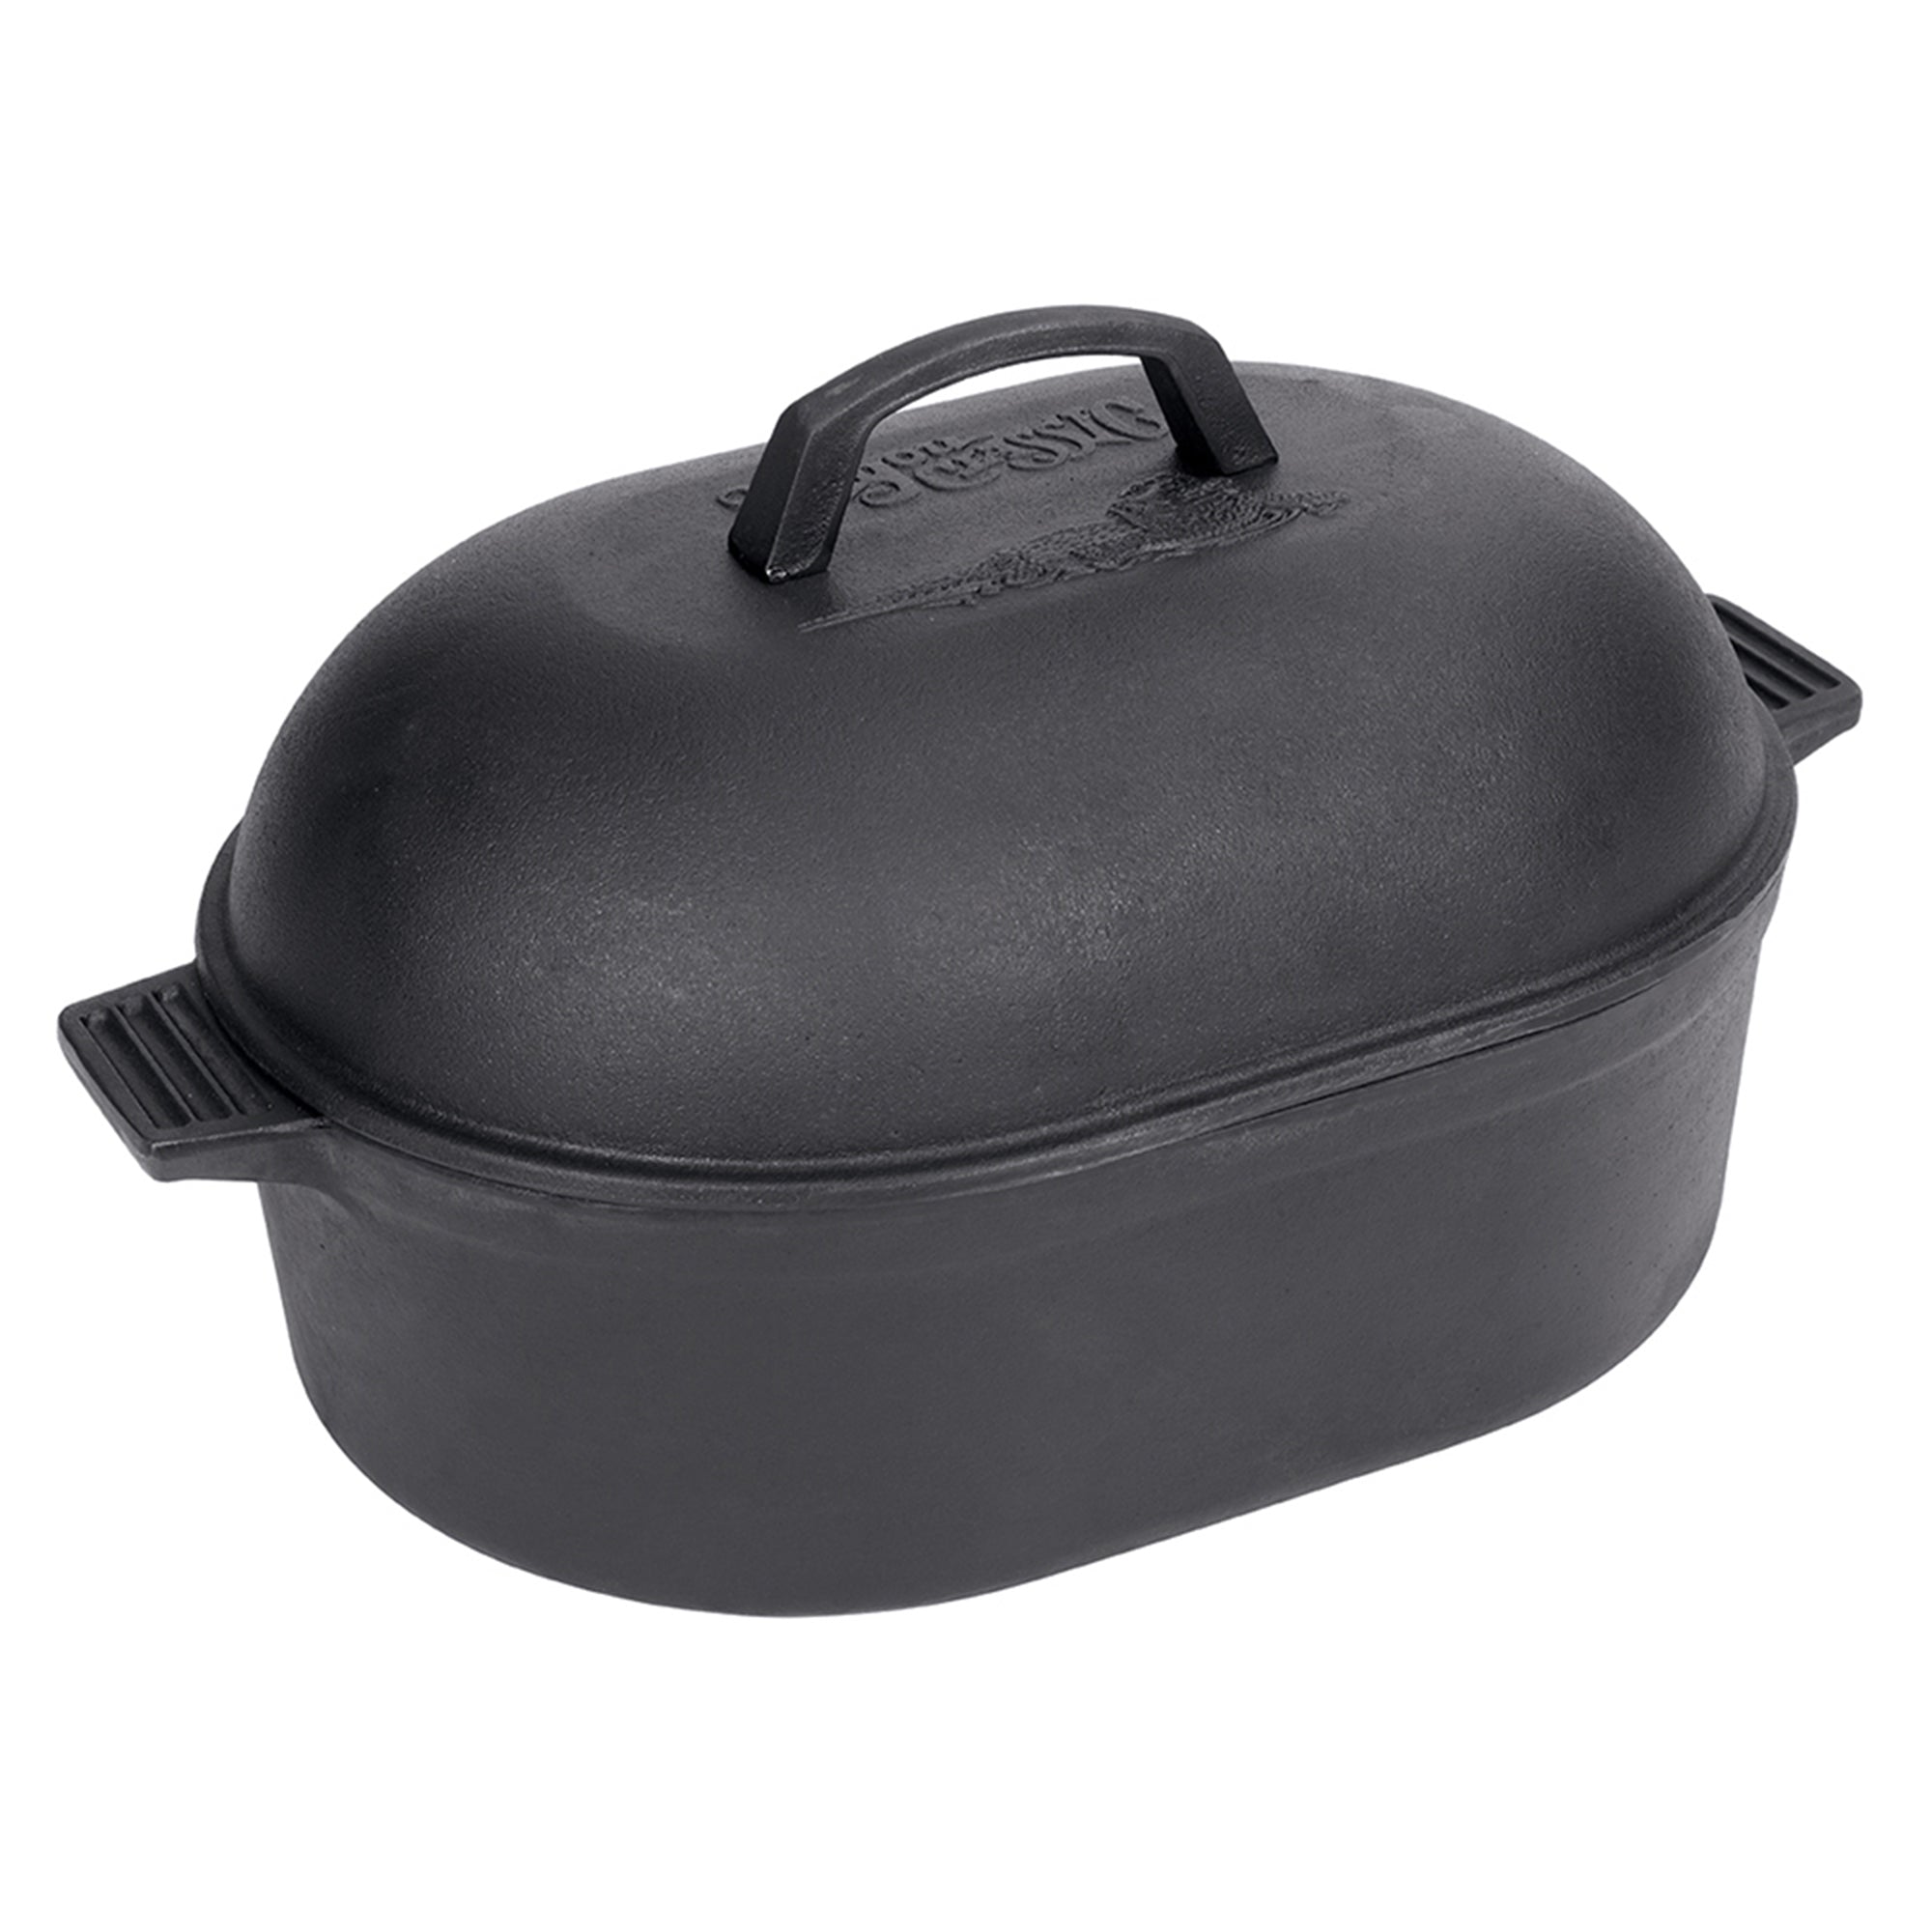 Bayou Classic 7415 6 Qt. Oval Cast Iron Roaster Pot with Lid and Handles 